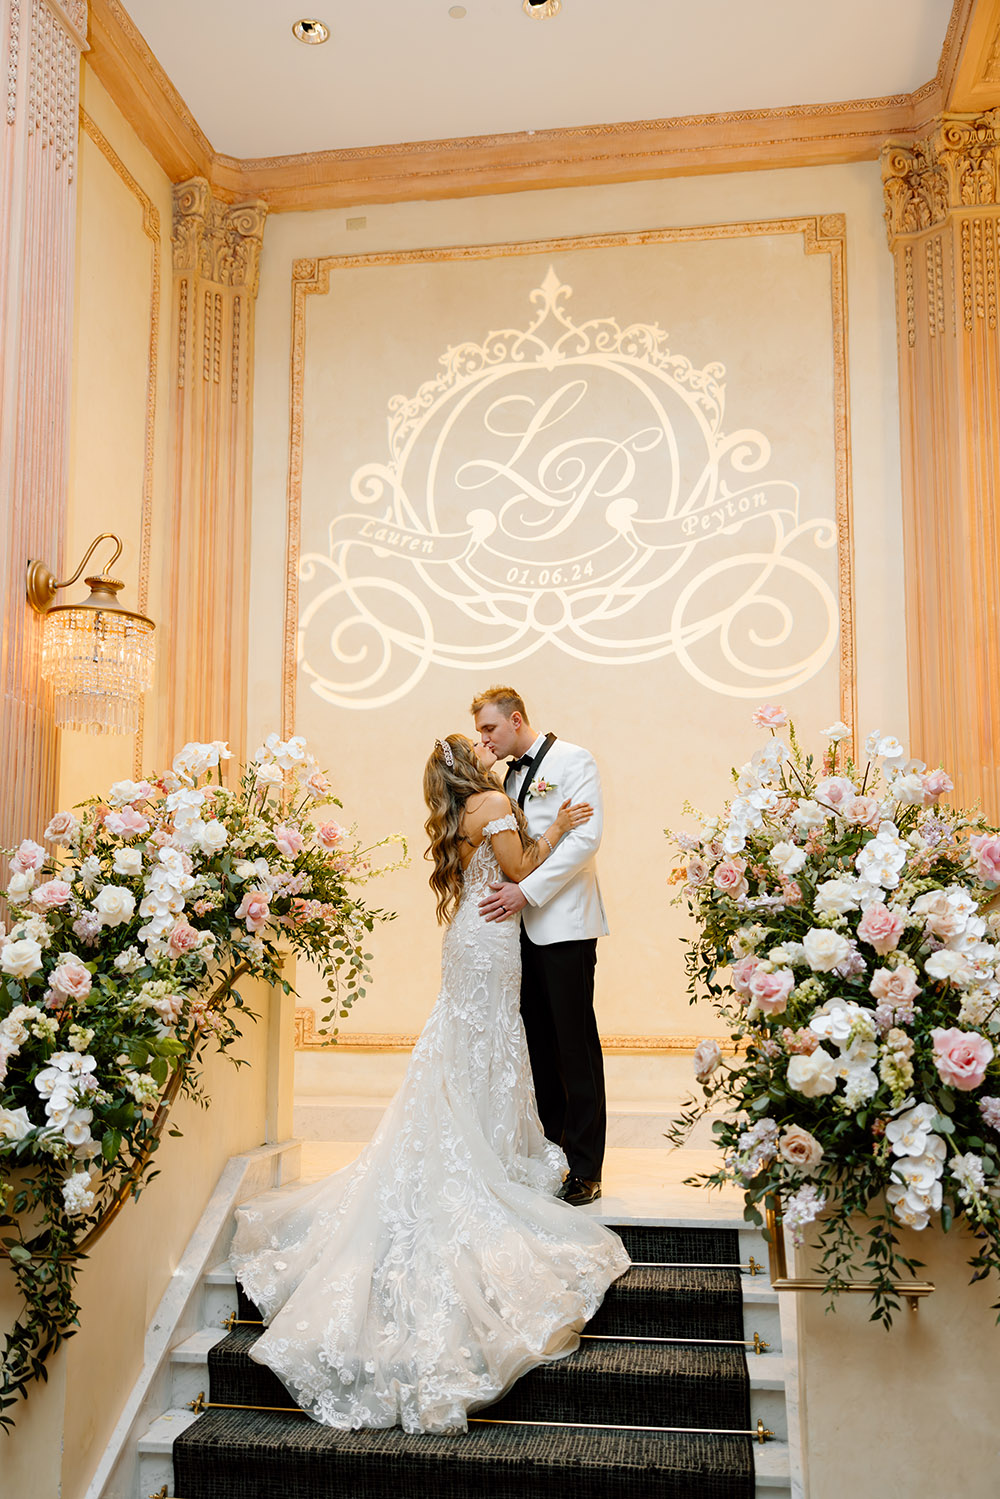 Lauren Wright + Peyton Meadows kiss at their wedding reception in the Crystal Ballroom of the Battle House Hotel in Mobile, AL